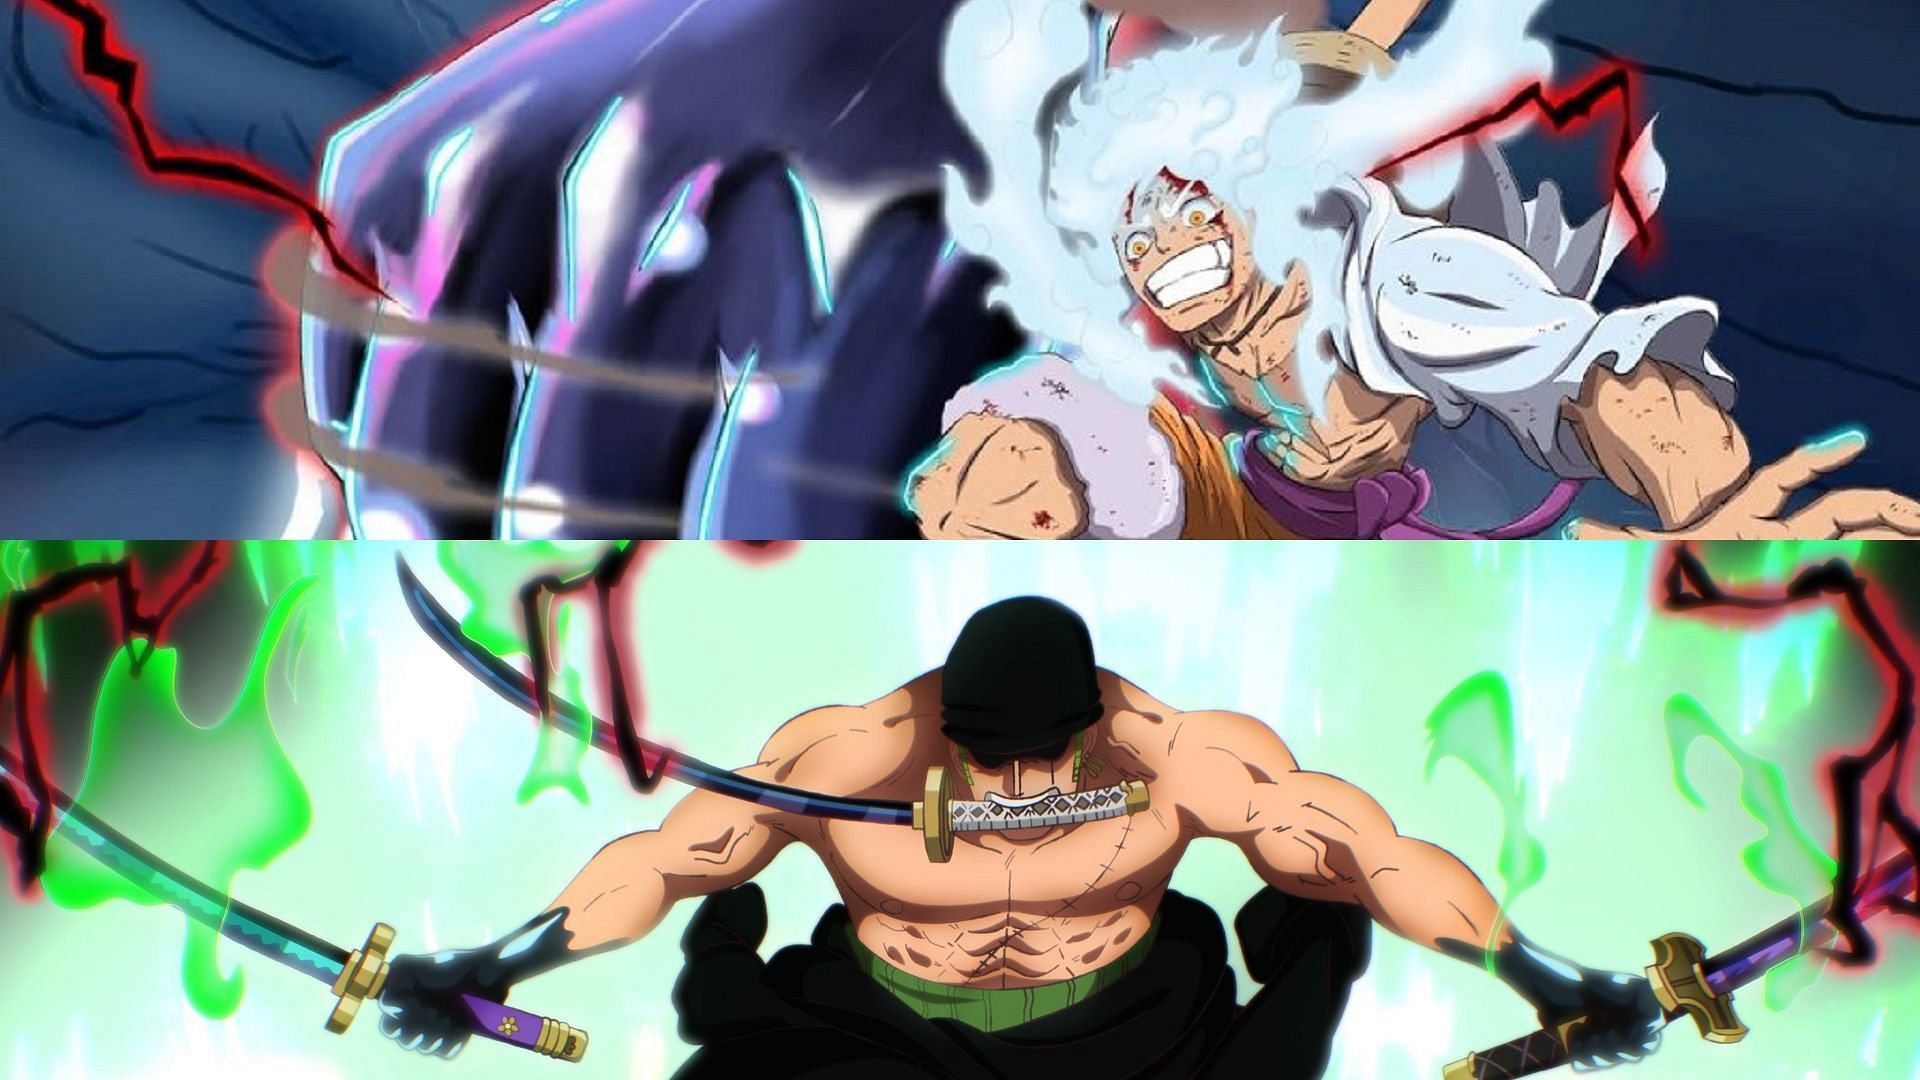 Being able to use the Advanced Conqueror&#039;s Haki, Luffy and Zoro are among the strongest characters in the series (Image via Eiichiro Oda/Shueisha, One Piece)